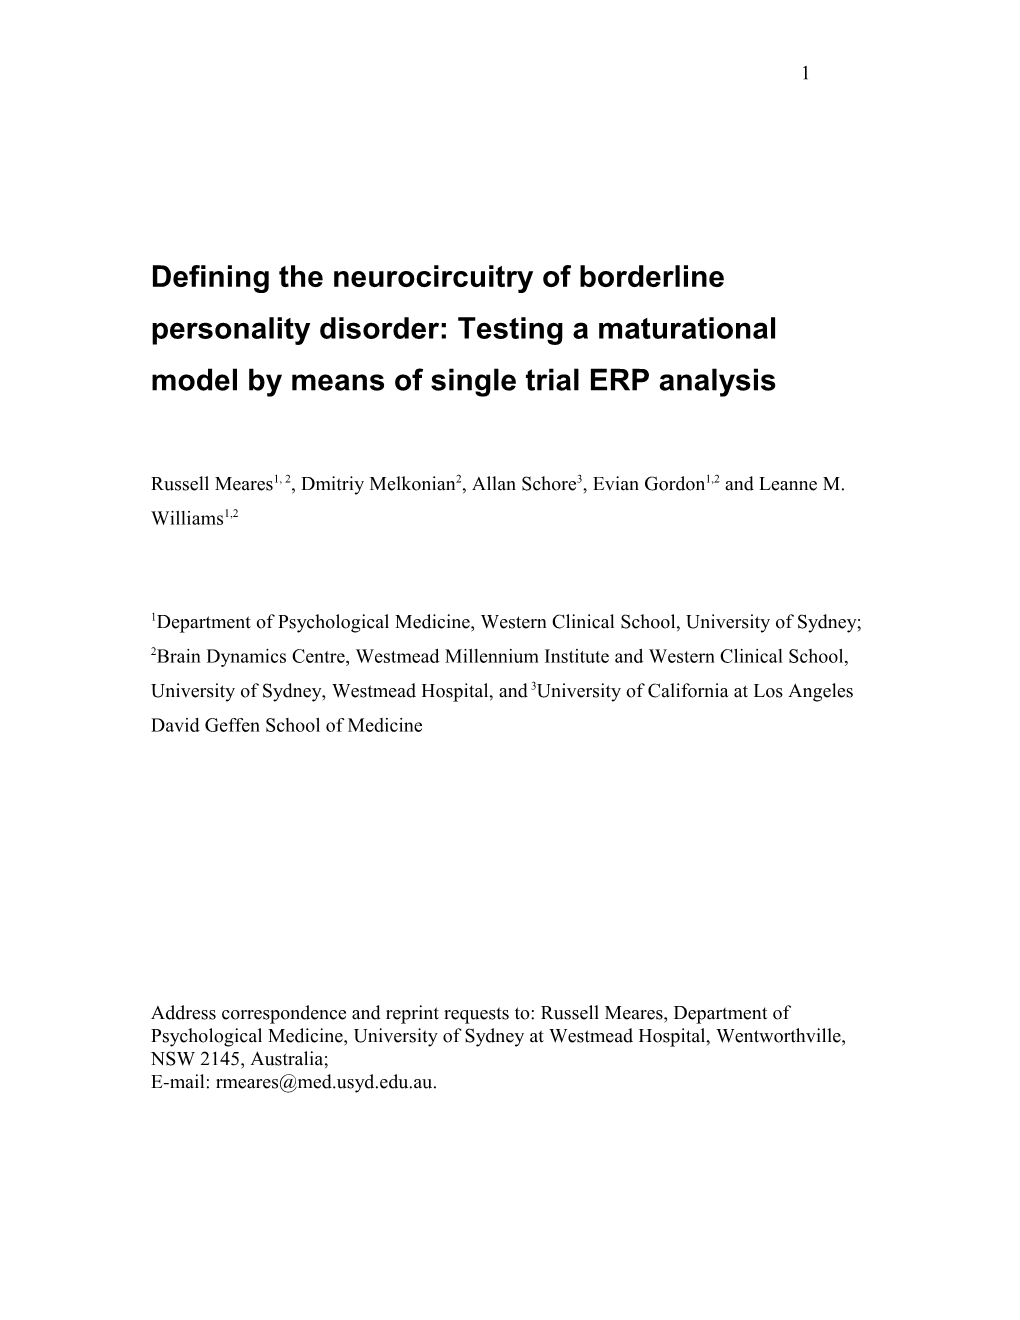 Defining the Neurocircuitry of Borderline Personality Disorder: Testing a Maturational